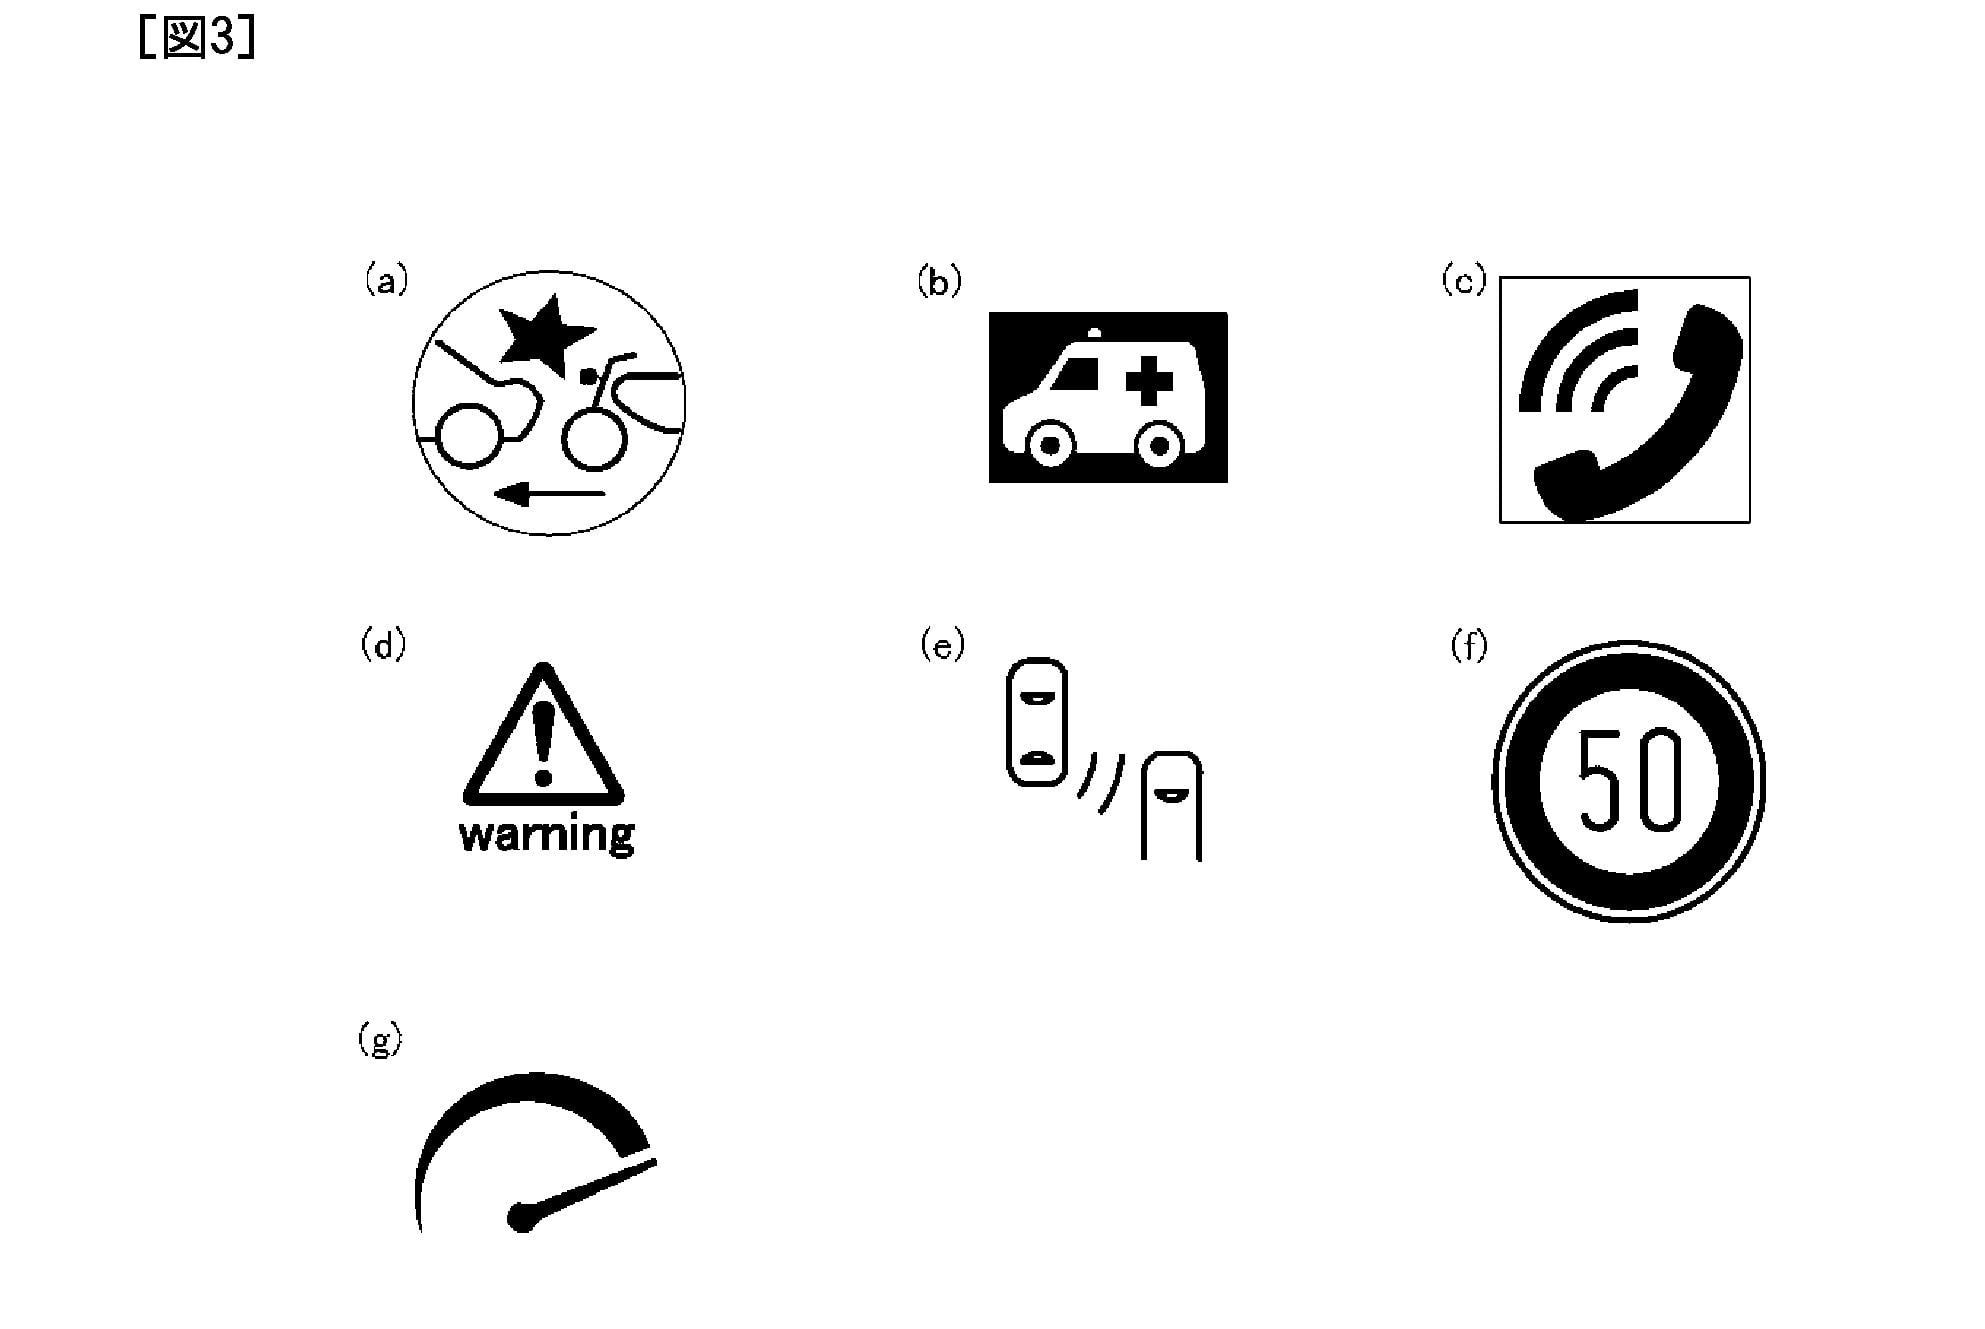 The new icons convey warnings about impending dangers.